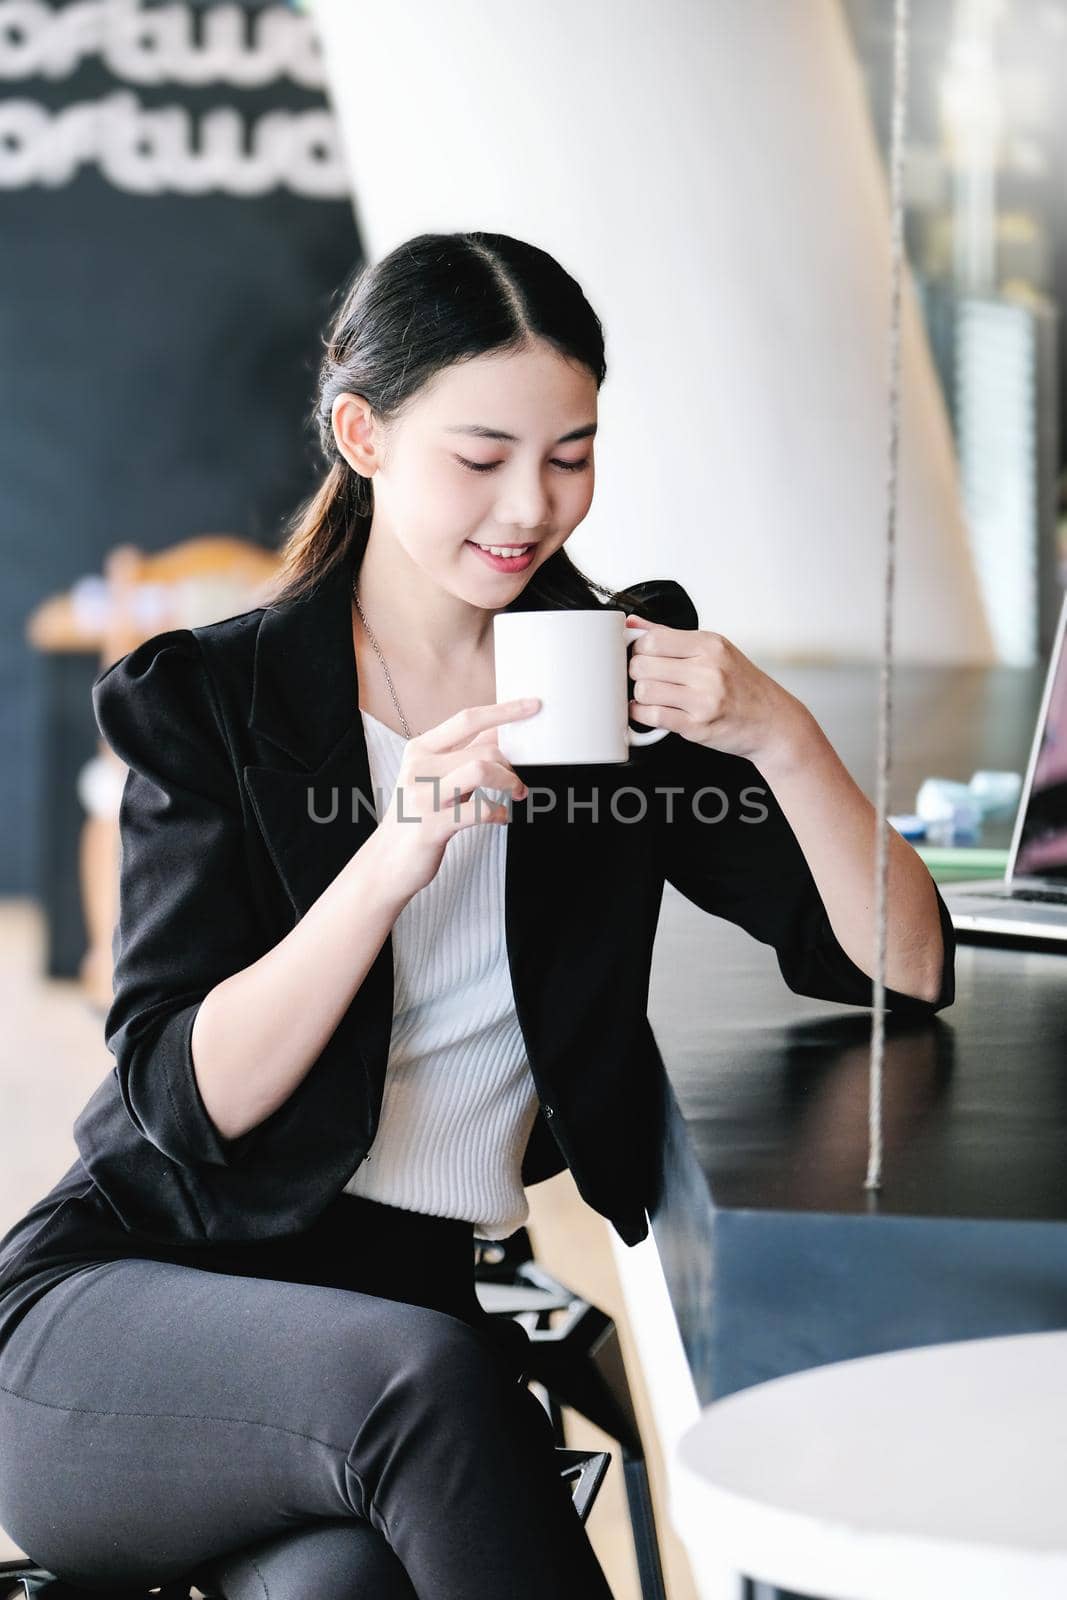 A female marketing manager is resting with a cup of coffee before returning to work to reduce drowsiness